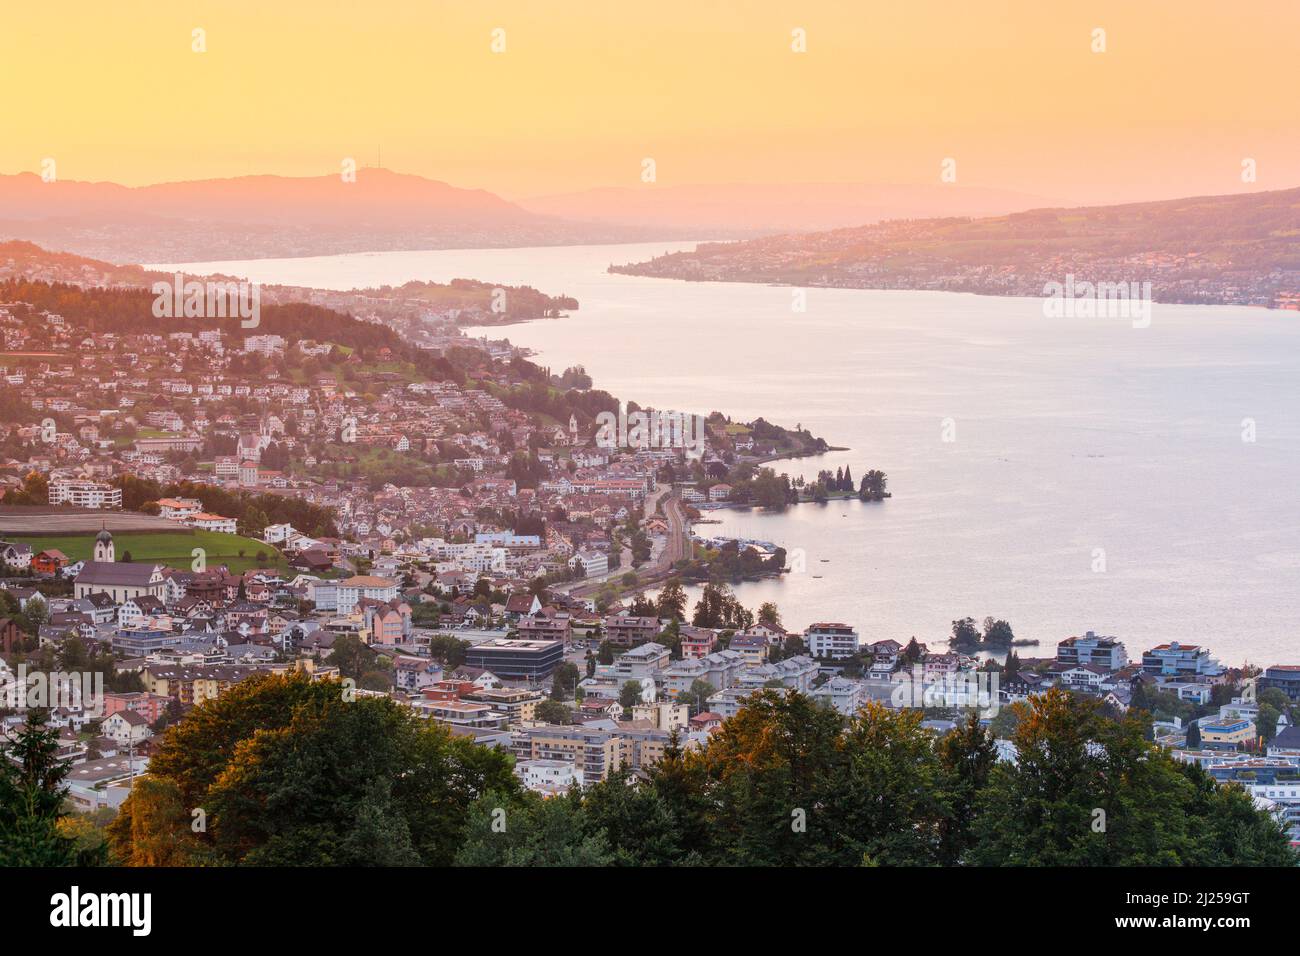 View at dusk from Feusisberg over Lake Zurich to Zurich, with the illuminated villages Wollerau, Richterswil, Wawdenswil and Meilen and the Uetliberg in the background, Canton Zurich, Switzerland Stock Photo